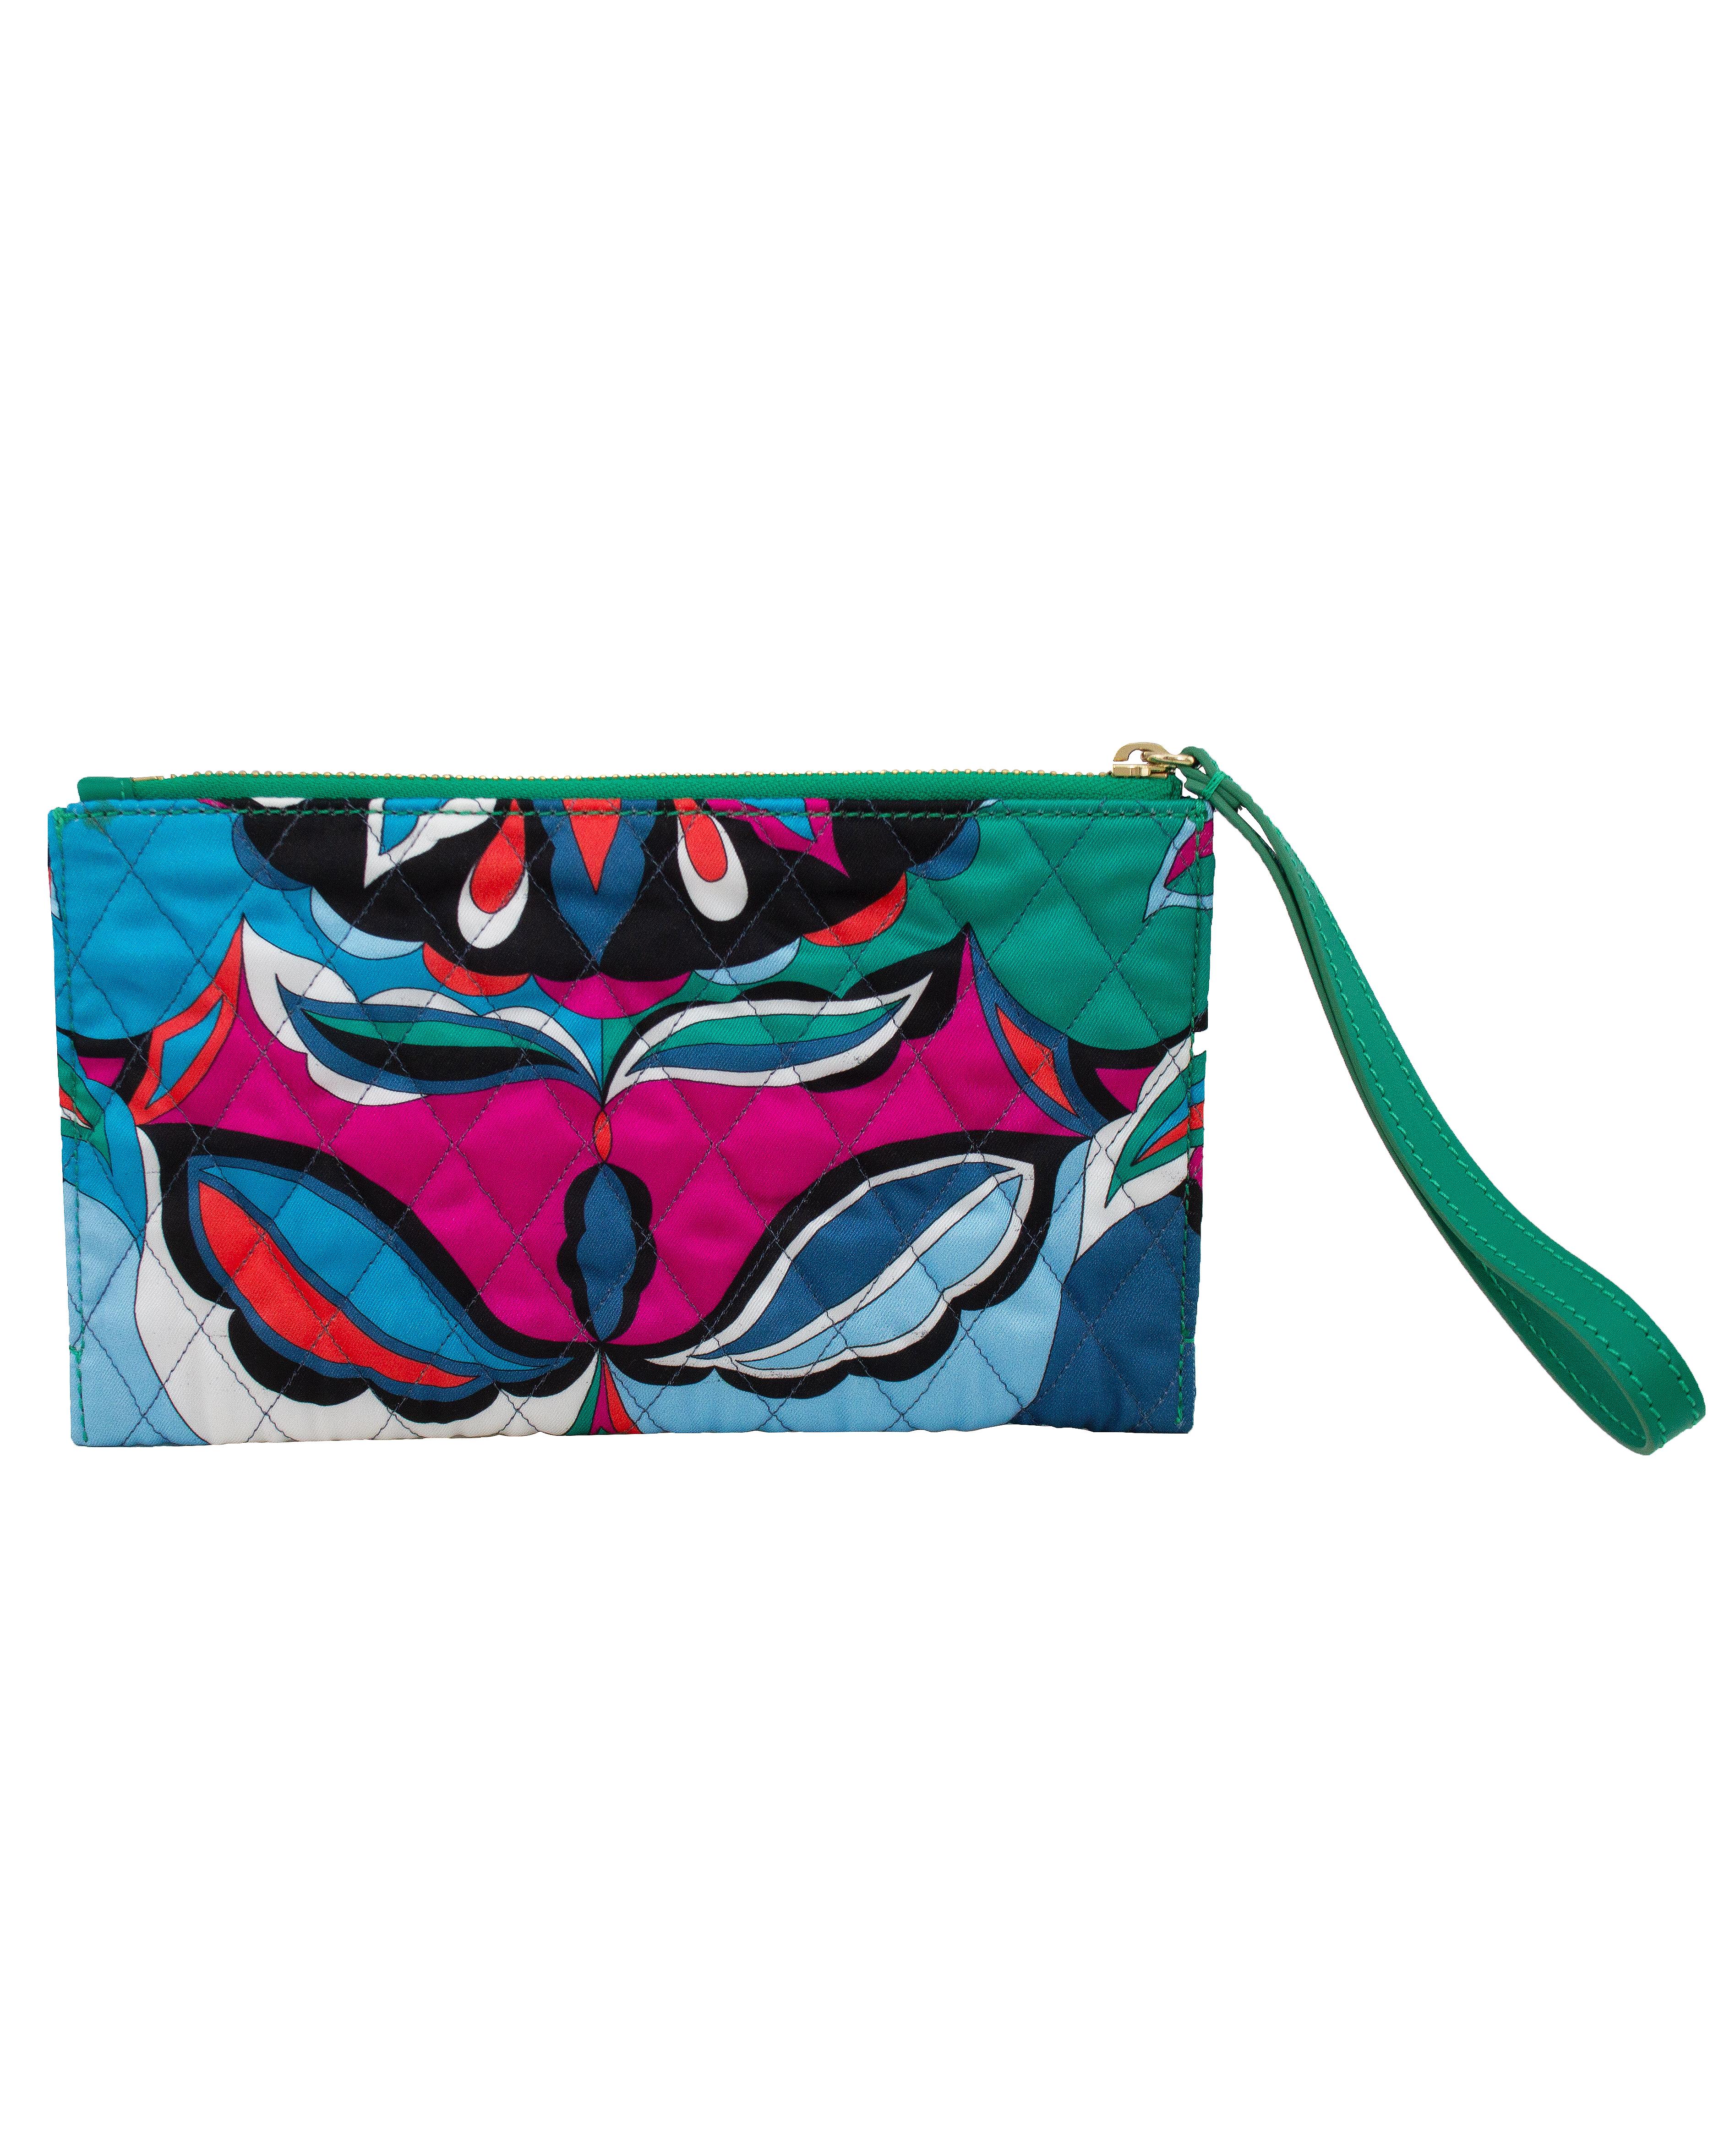 Emilio Pucci wristlet pouch from the mid 2000s. Multi colour abstract silk with diamond shaped top stitching creating quilting. Emerald green wrist strap and trim with contrasting gold top zipper. Interior is like a wallet with card and cash slots.